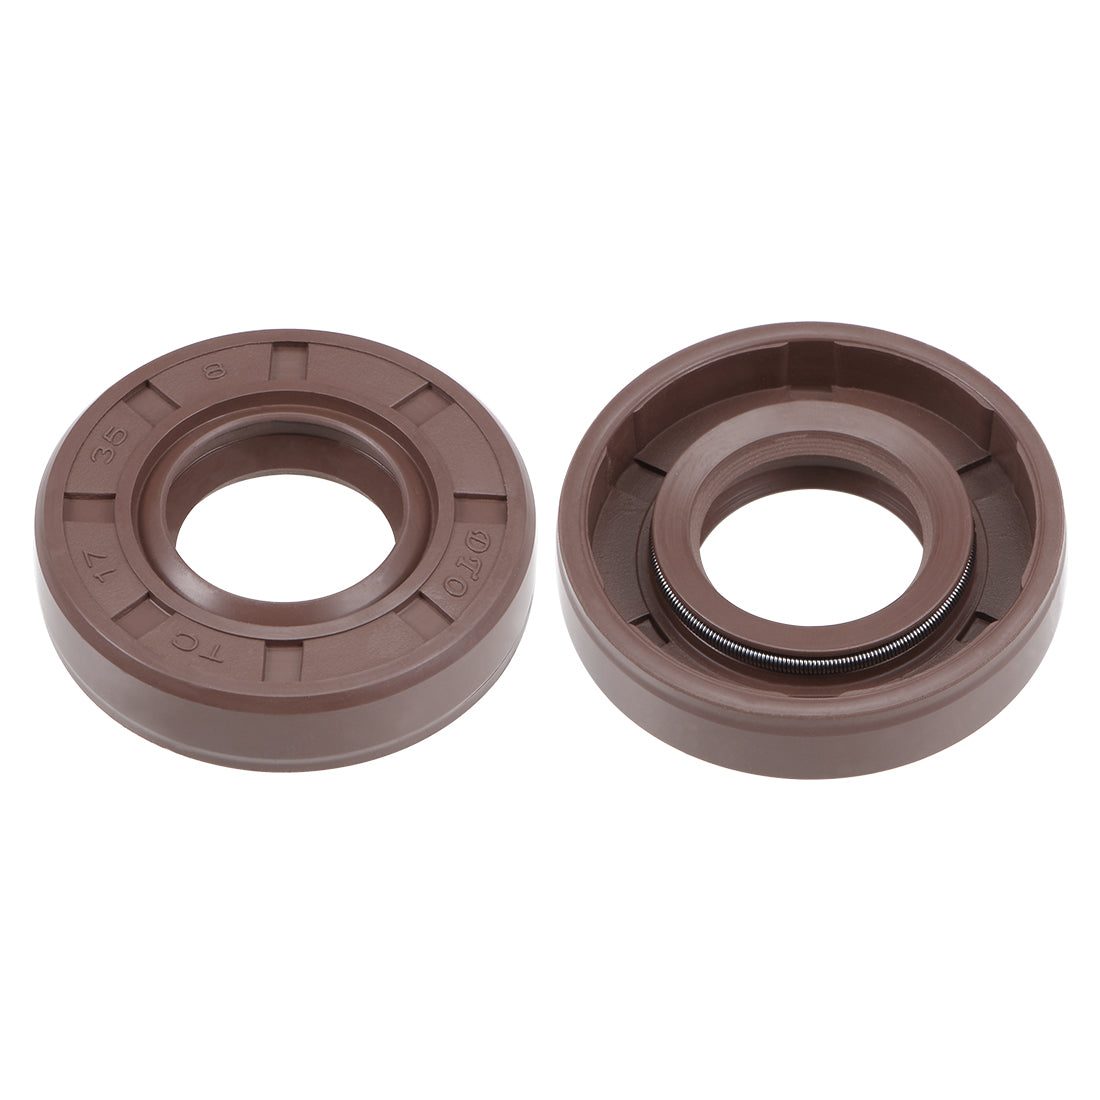 uxcell Uxcell Oil Seal 17mm Inner Dia 35mm OD 8mm Thick Fluorine Rubber Double Lip Seals 2Pcs